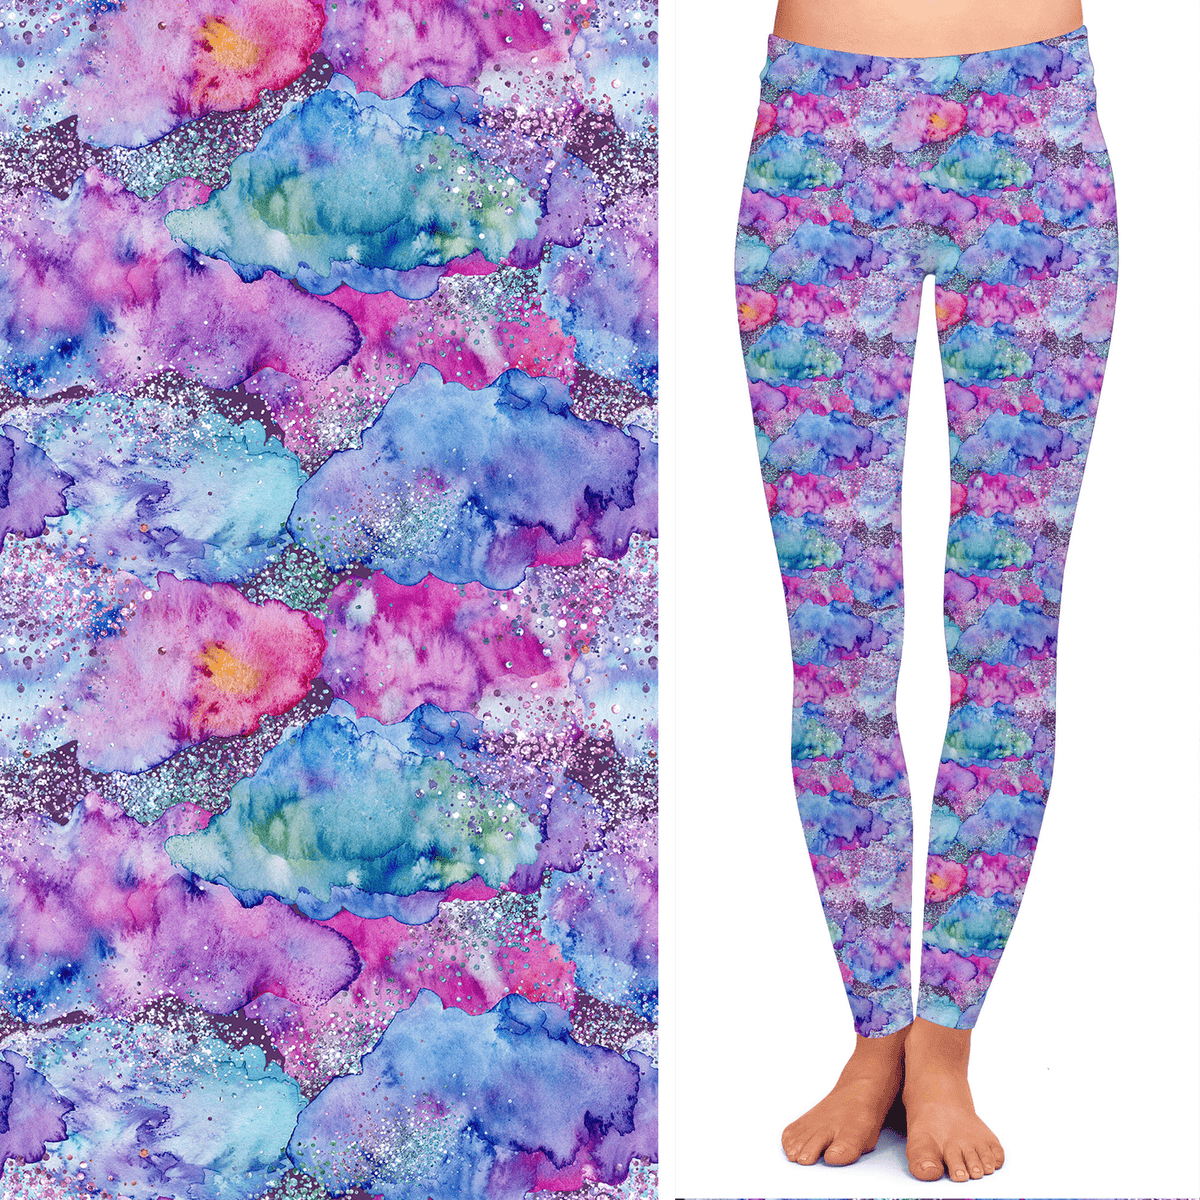 Watercolor Printed Glitter Leggings with Pockets Design